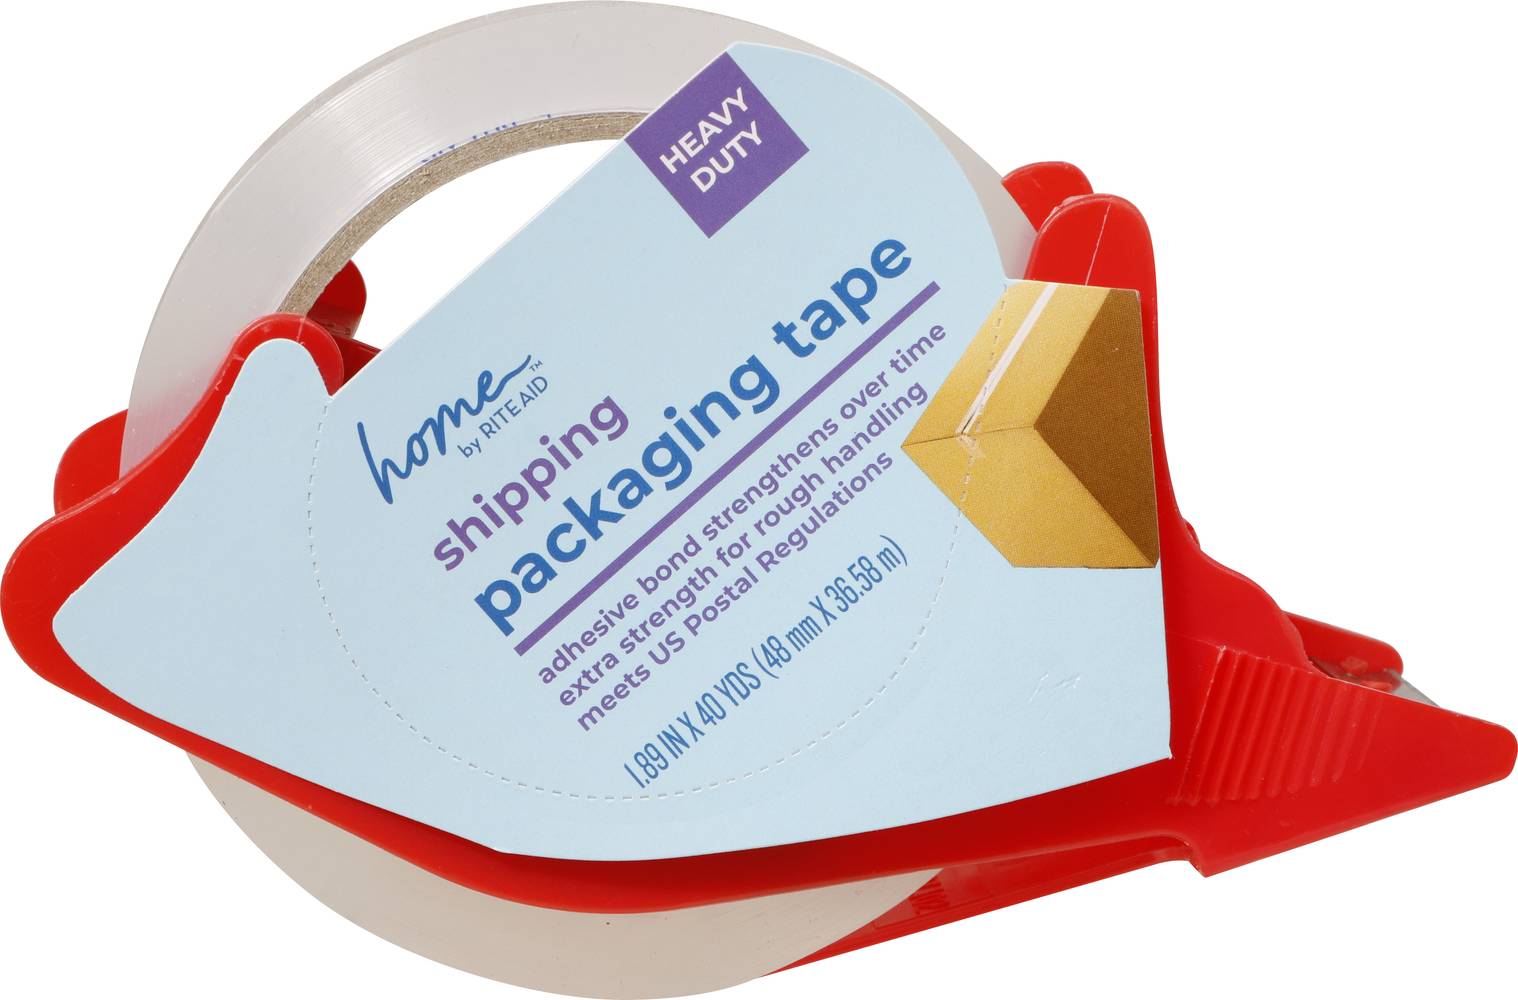 Rite Aid Home Packaging Tape 1.89" x 40 yds (1 ct)